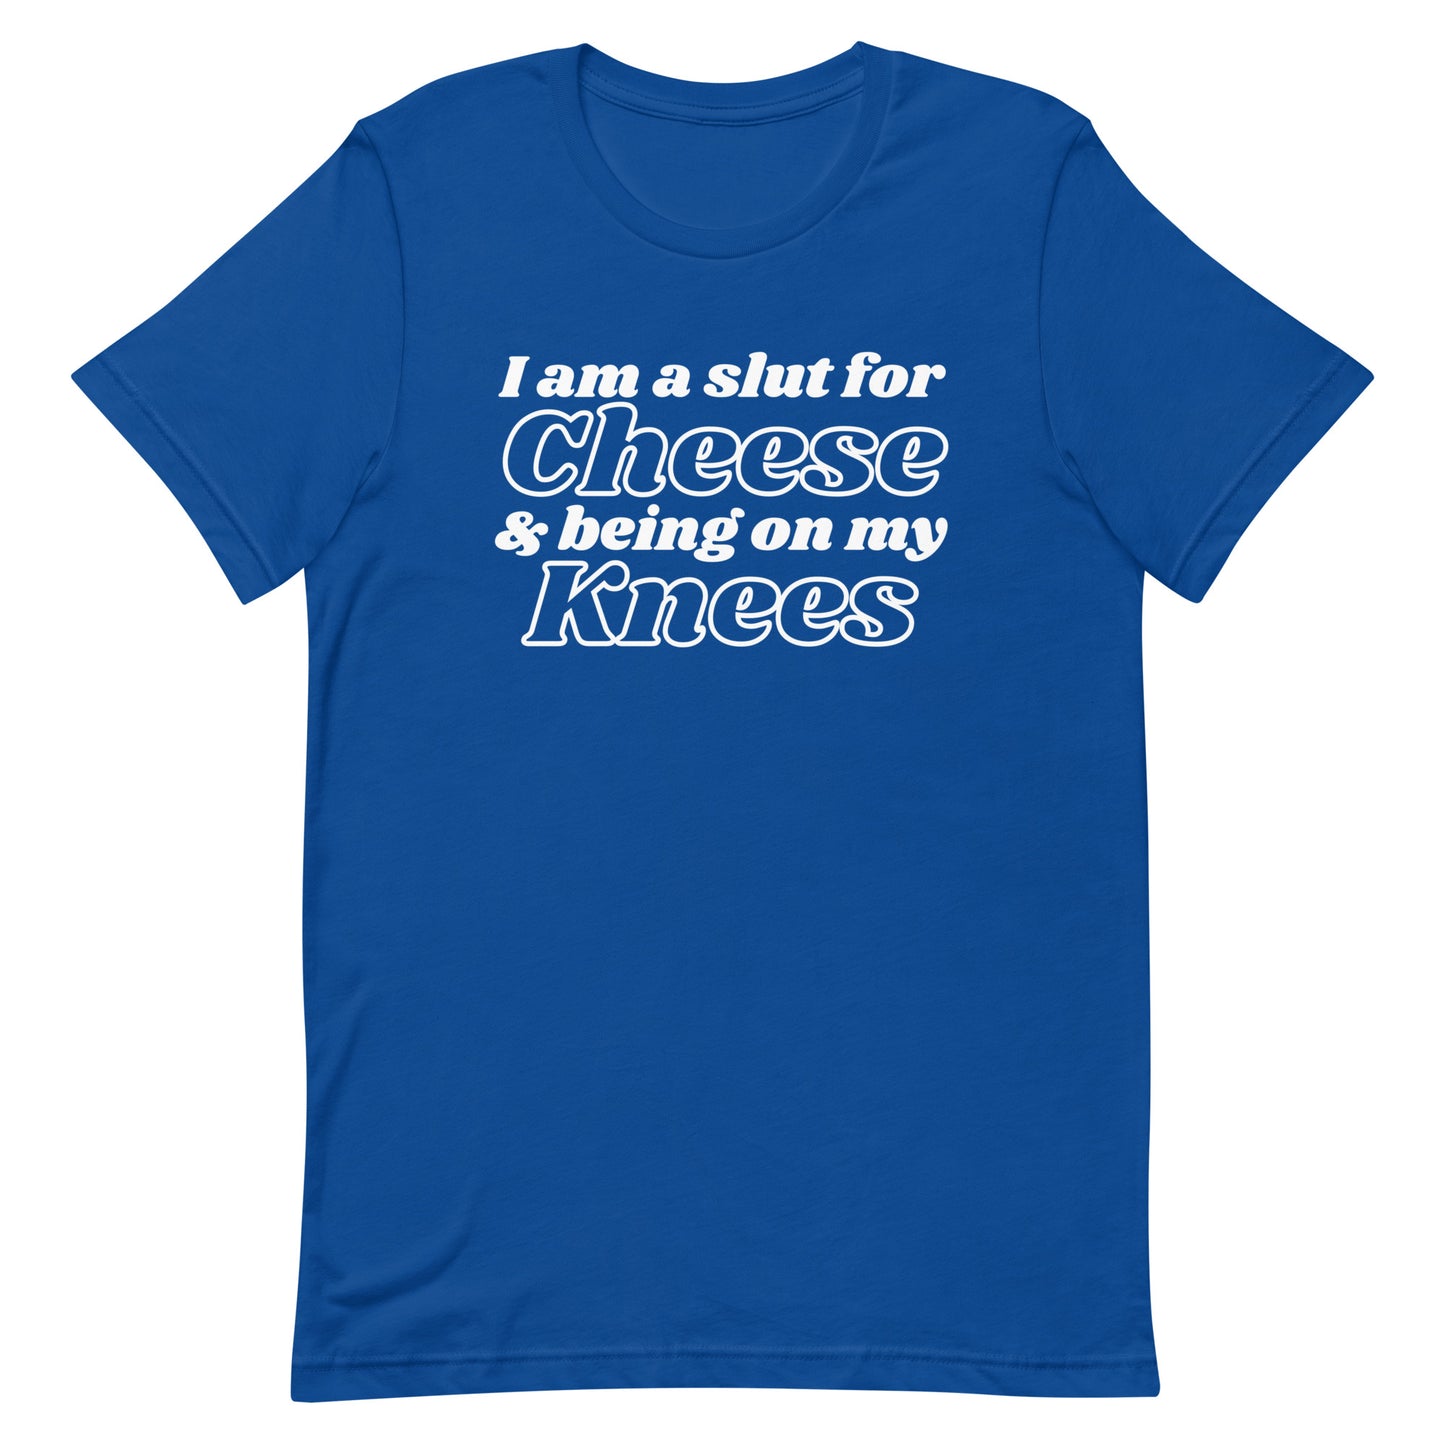 Slut For Cheese & Being on my Knees Unisex t-shirt